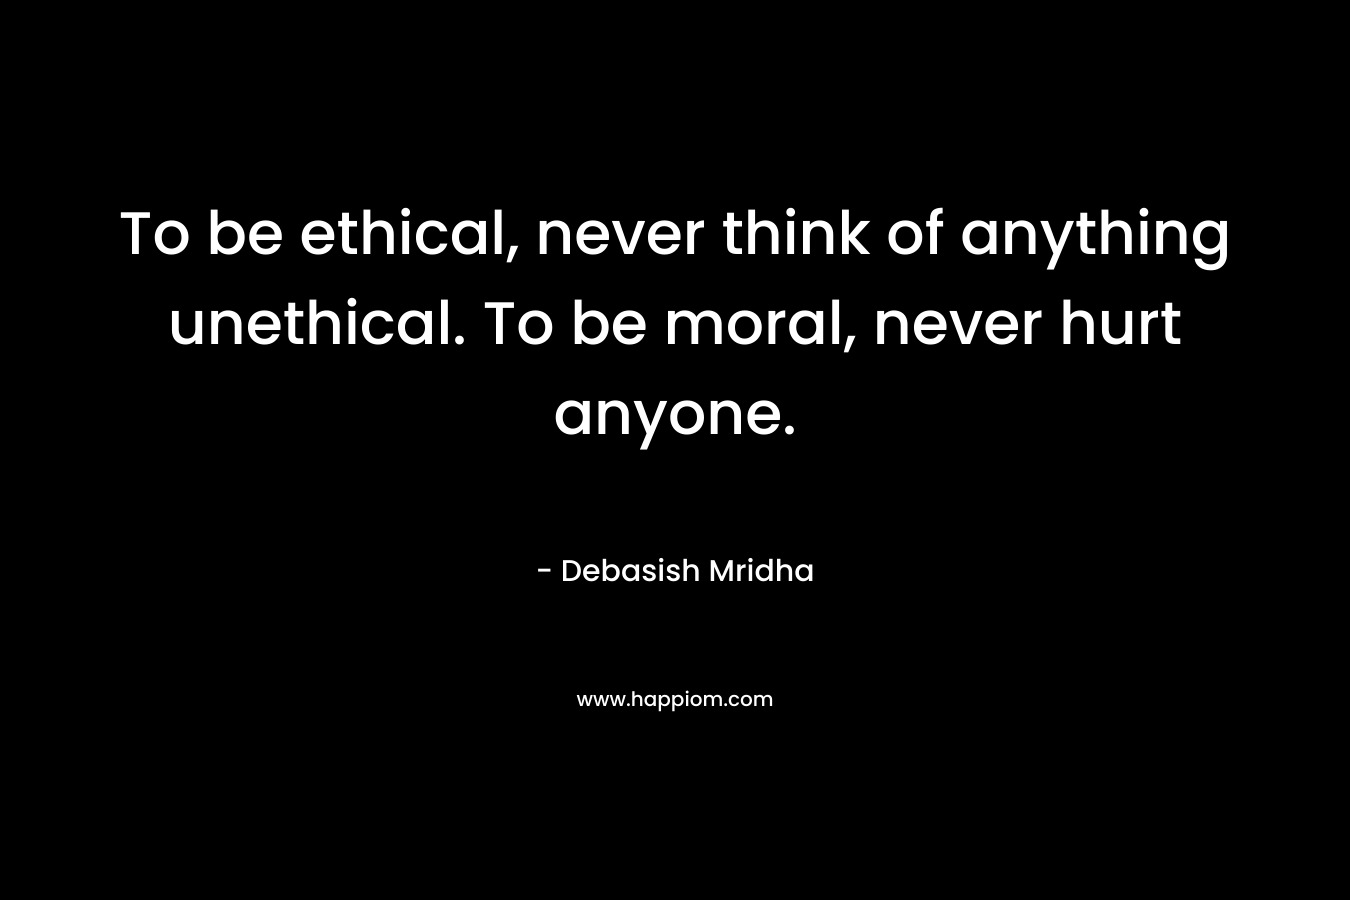 To be ethical, never think of anything unethical. To be moral, never hurt anyone.